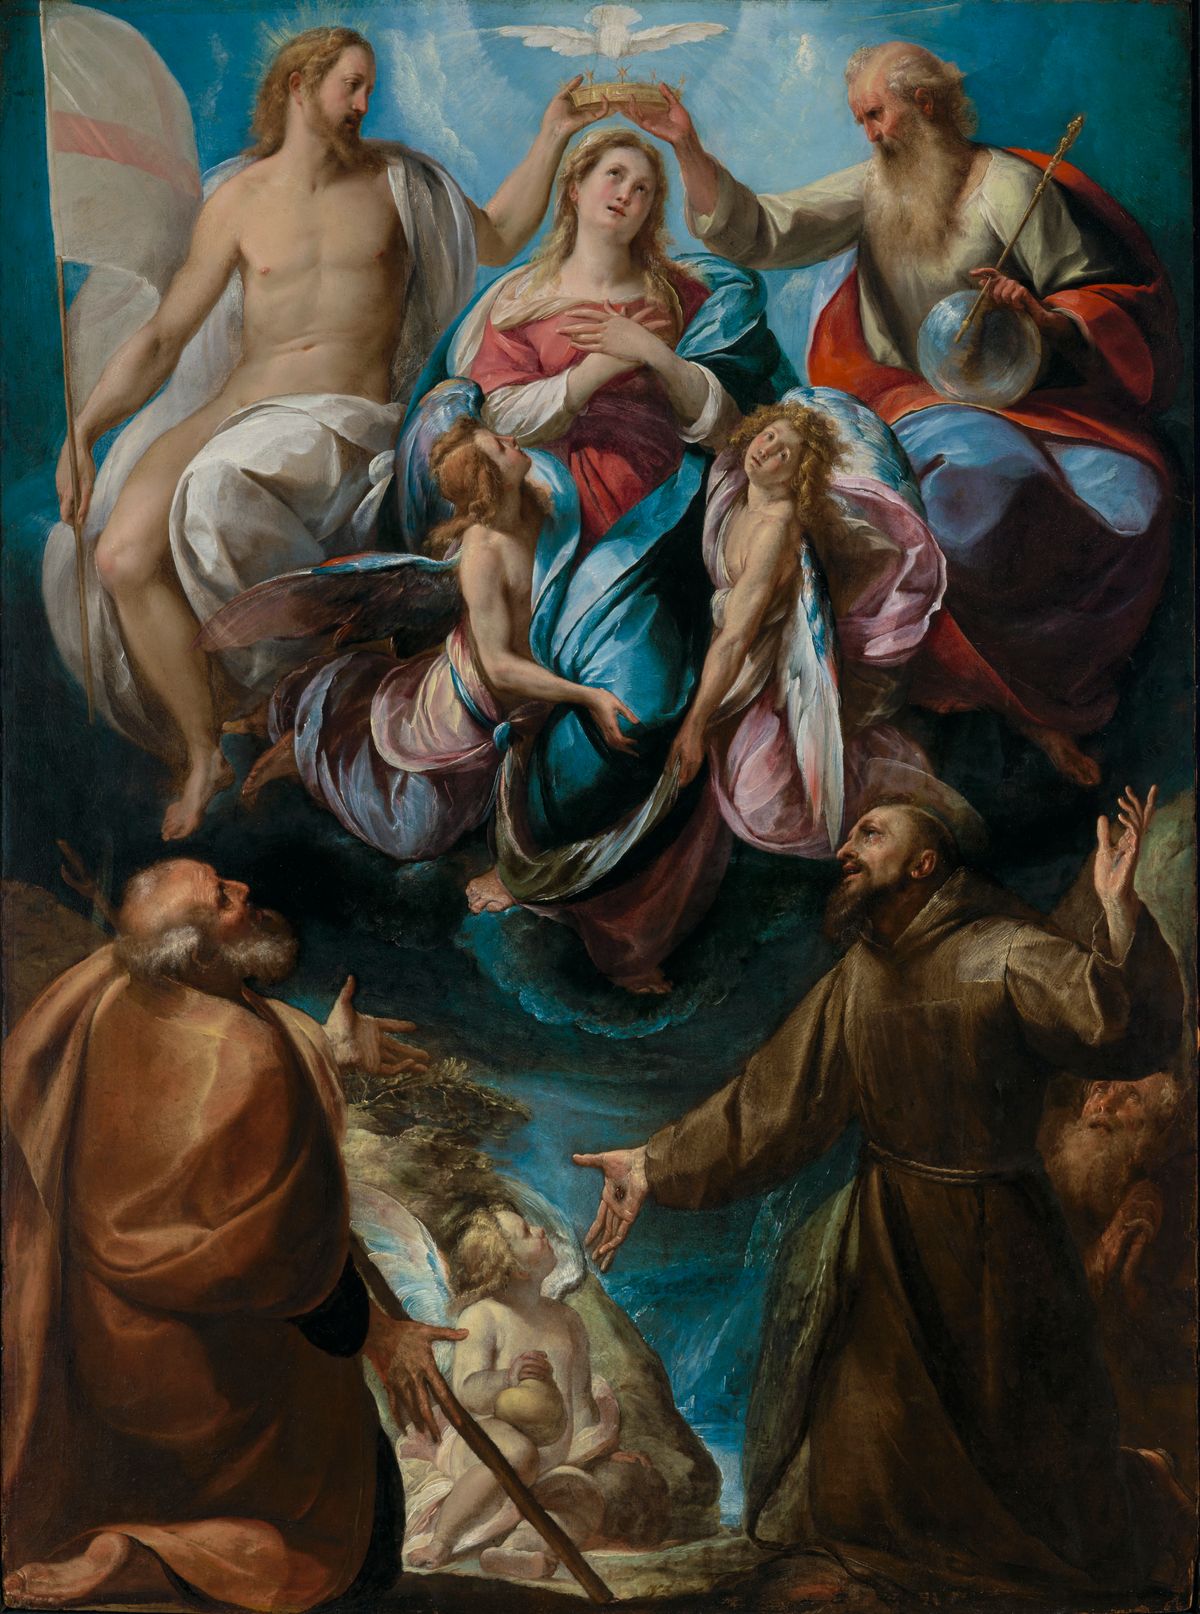 The Coronation of the Virgin with Saints Joseph and Francis by Giulio Cesare Procaccini (1605) - Public Domain Catholic Painting